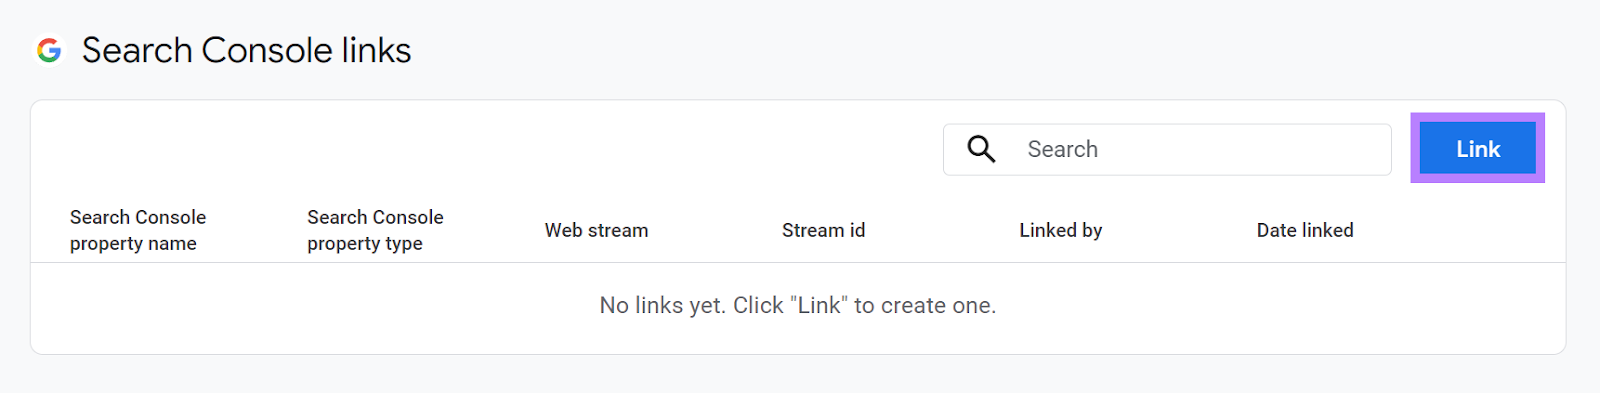 Link button highlighted on Search Console Links page.